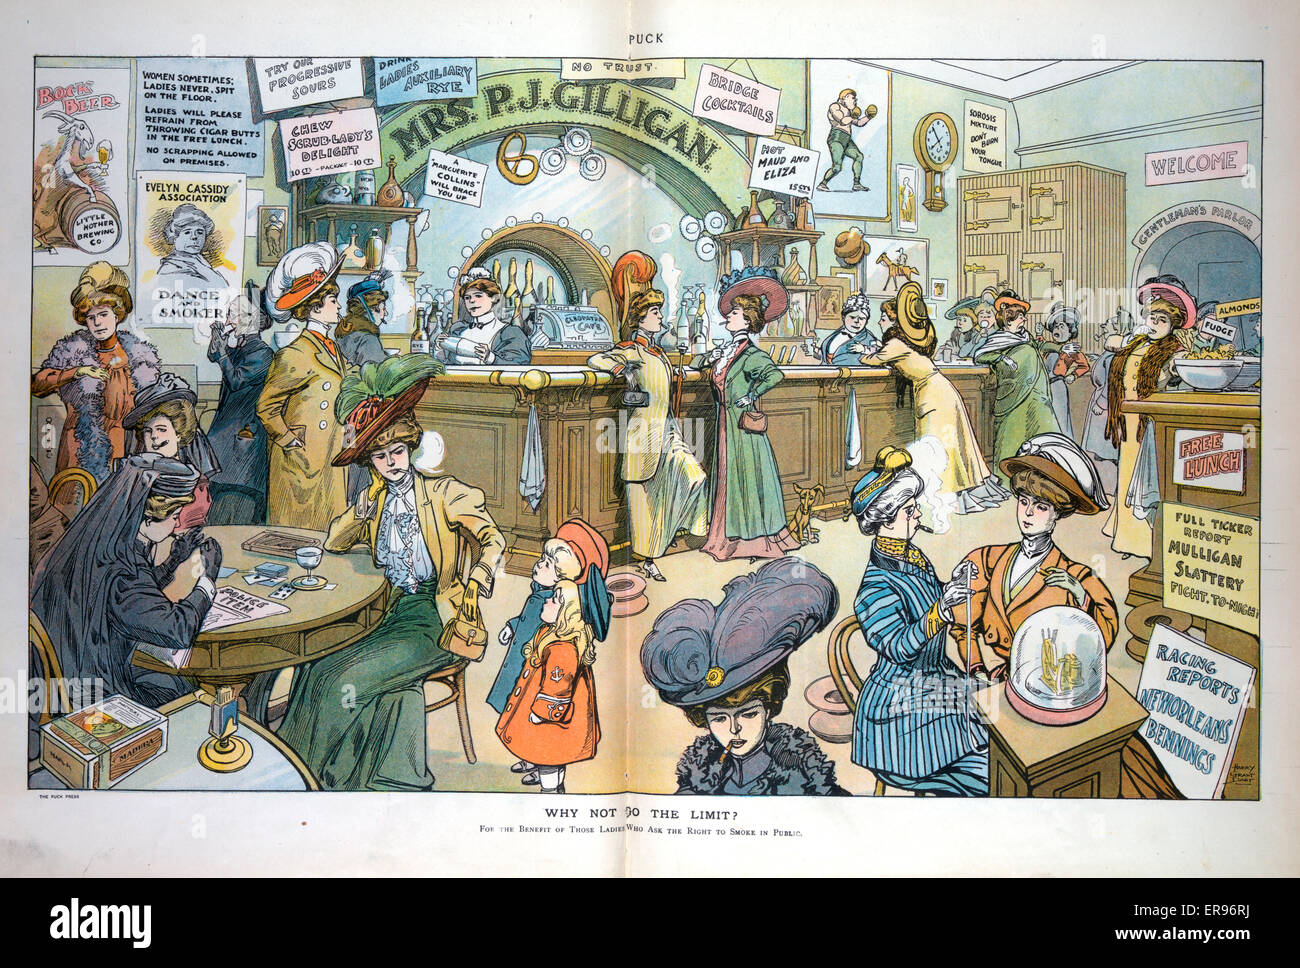 Why not go the limit?. Illustration shows many women in the Mrs. PJ Gilligan bar smoking and drinking at their leisure. Date 1908 March 18. Why not go the limit?. Illustration shows many women in the Mrs. PJ Gilligan bar smoking and drinking at their leis Stock Photo